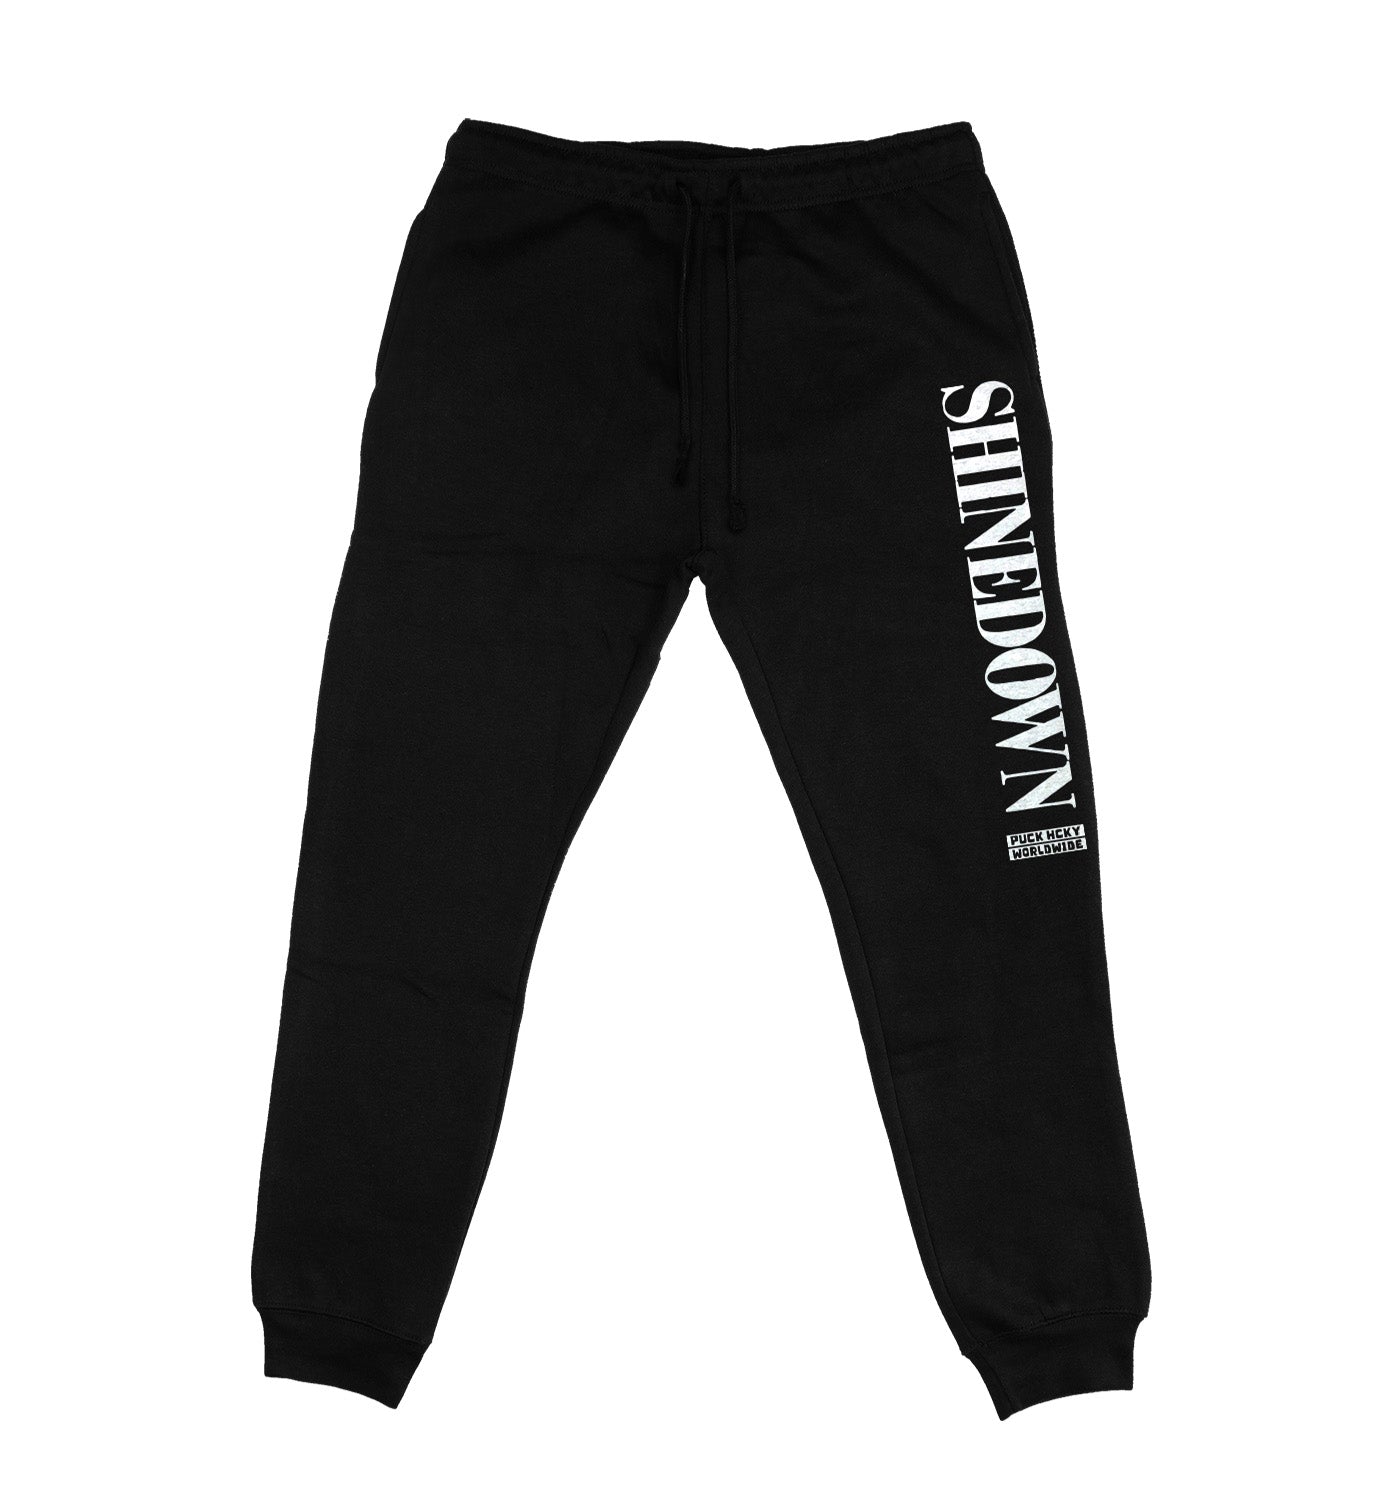 SHINEDOWN ‘ADRENALINE’ hockey jogging pants in black front view